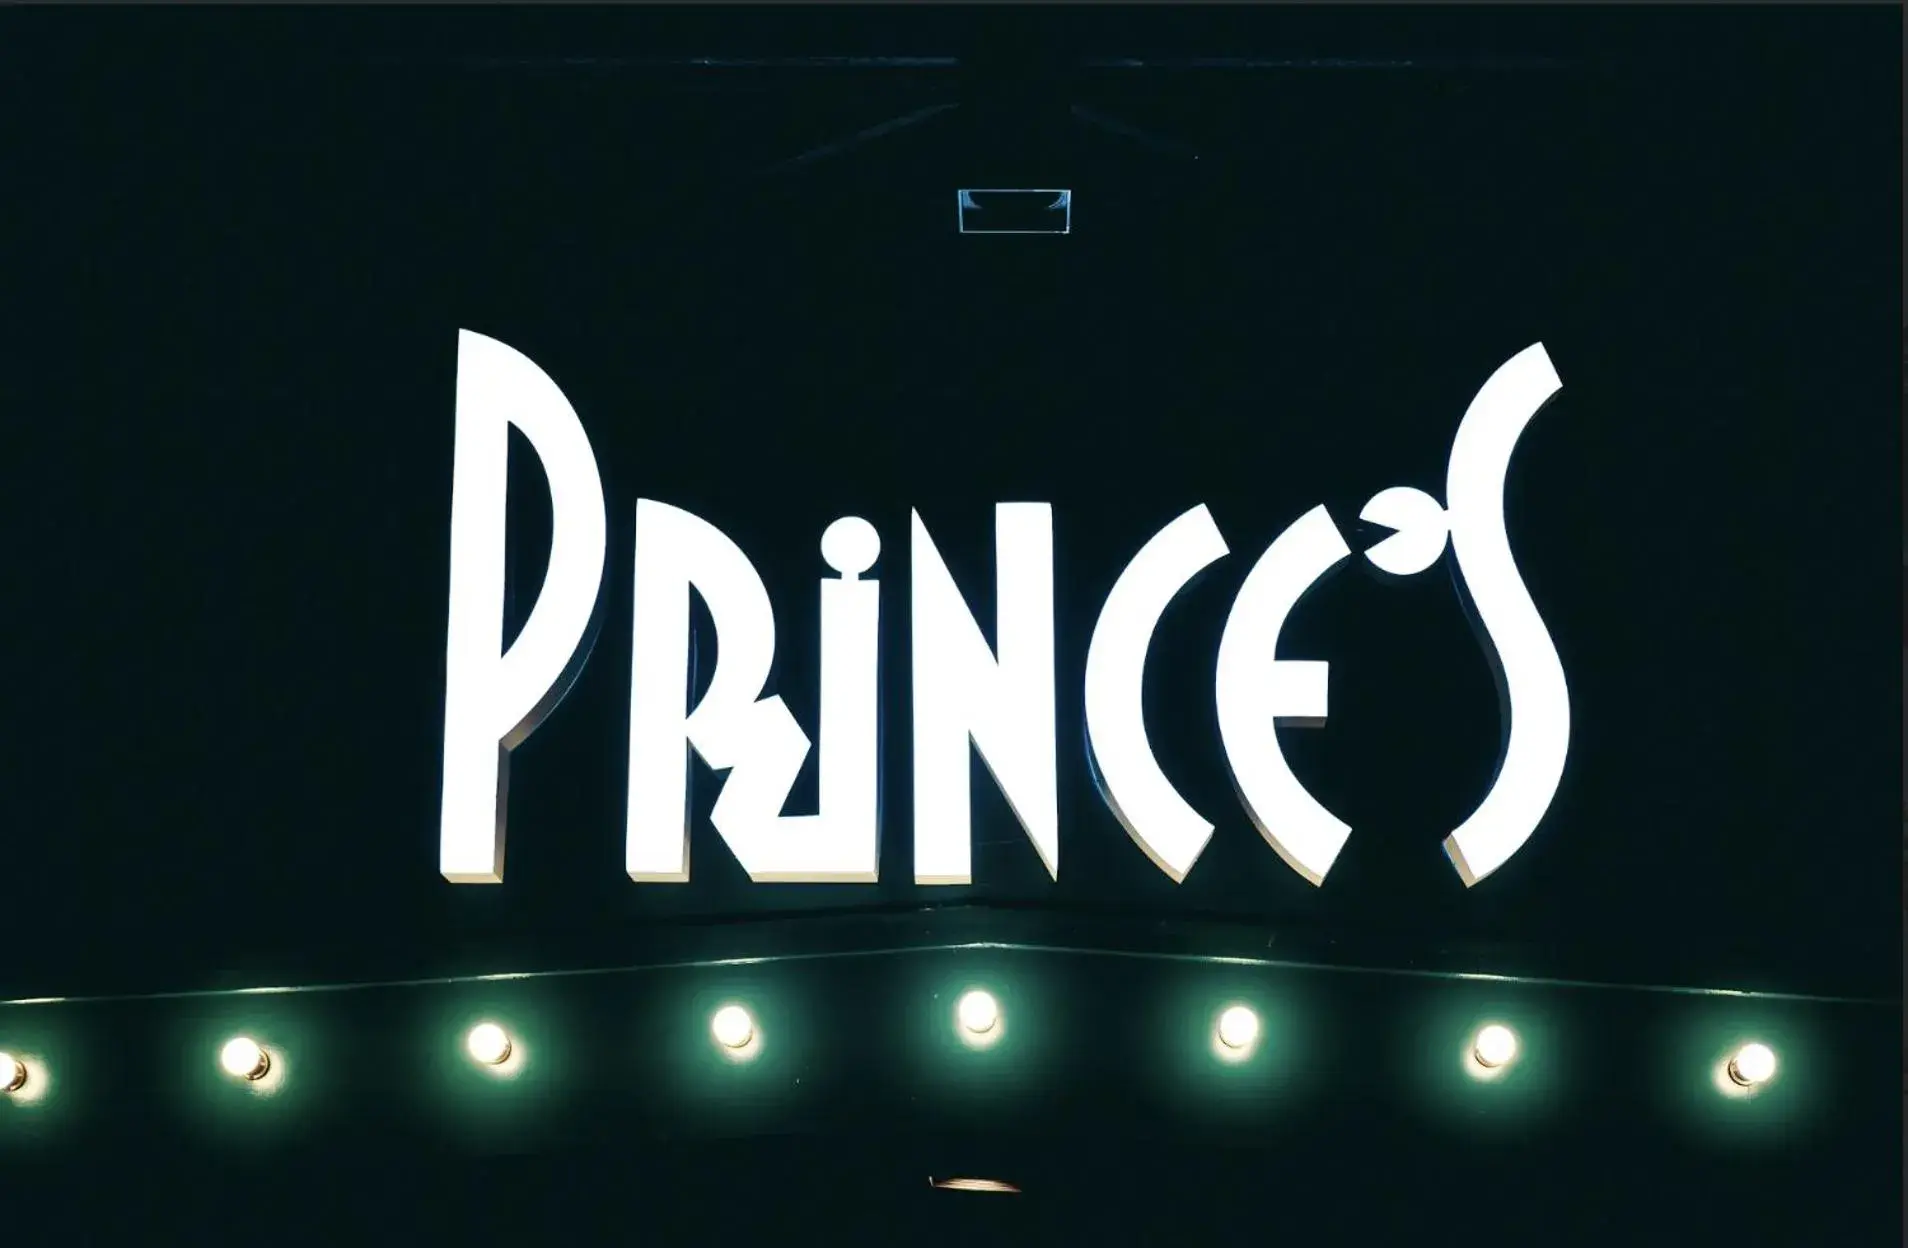 Property logo or sign in Prince Theatre Heritage Stay